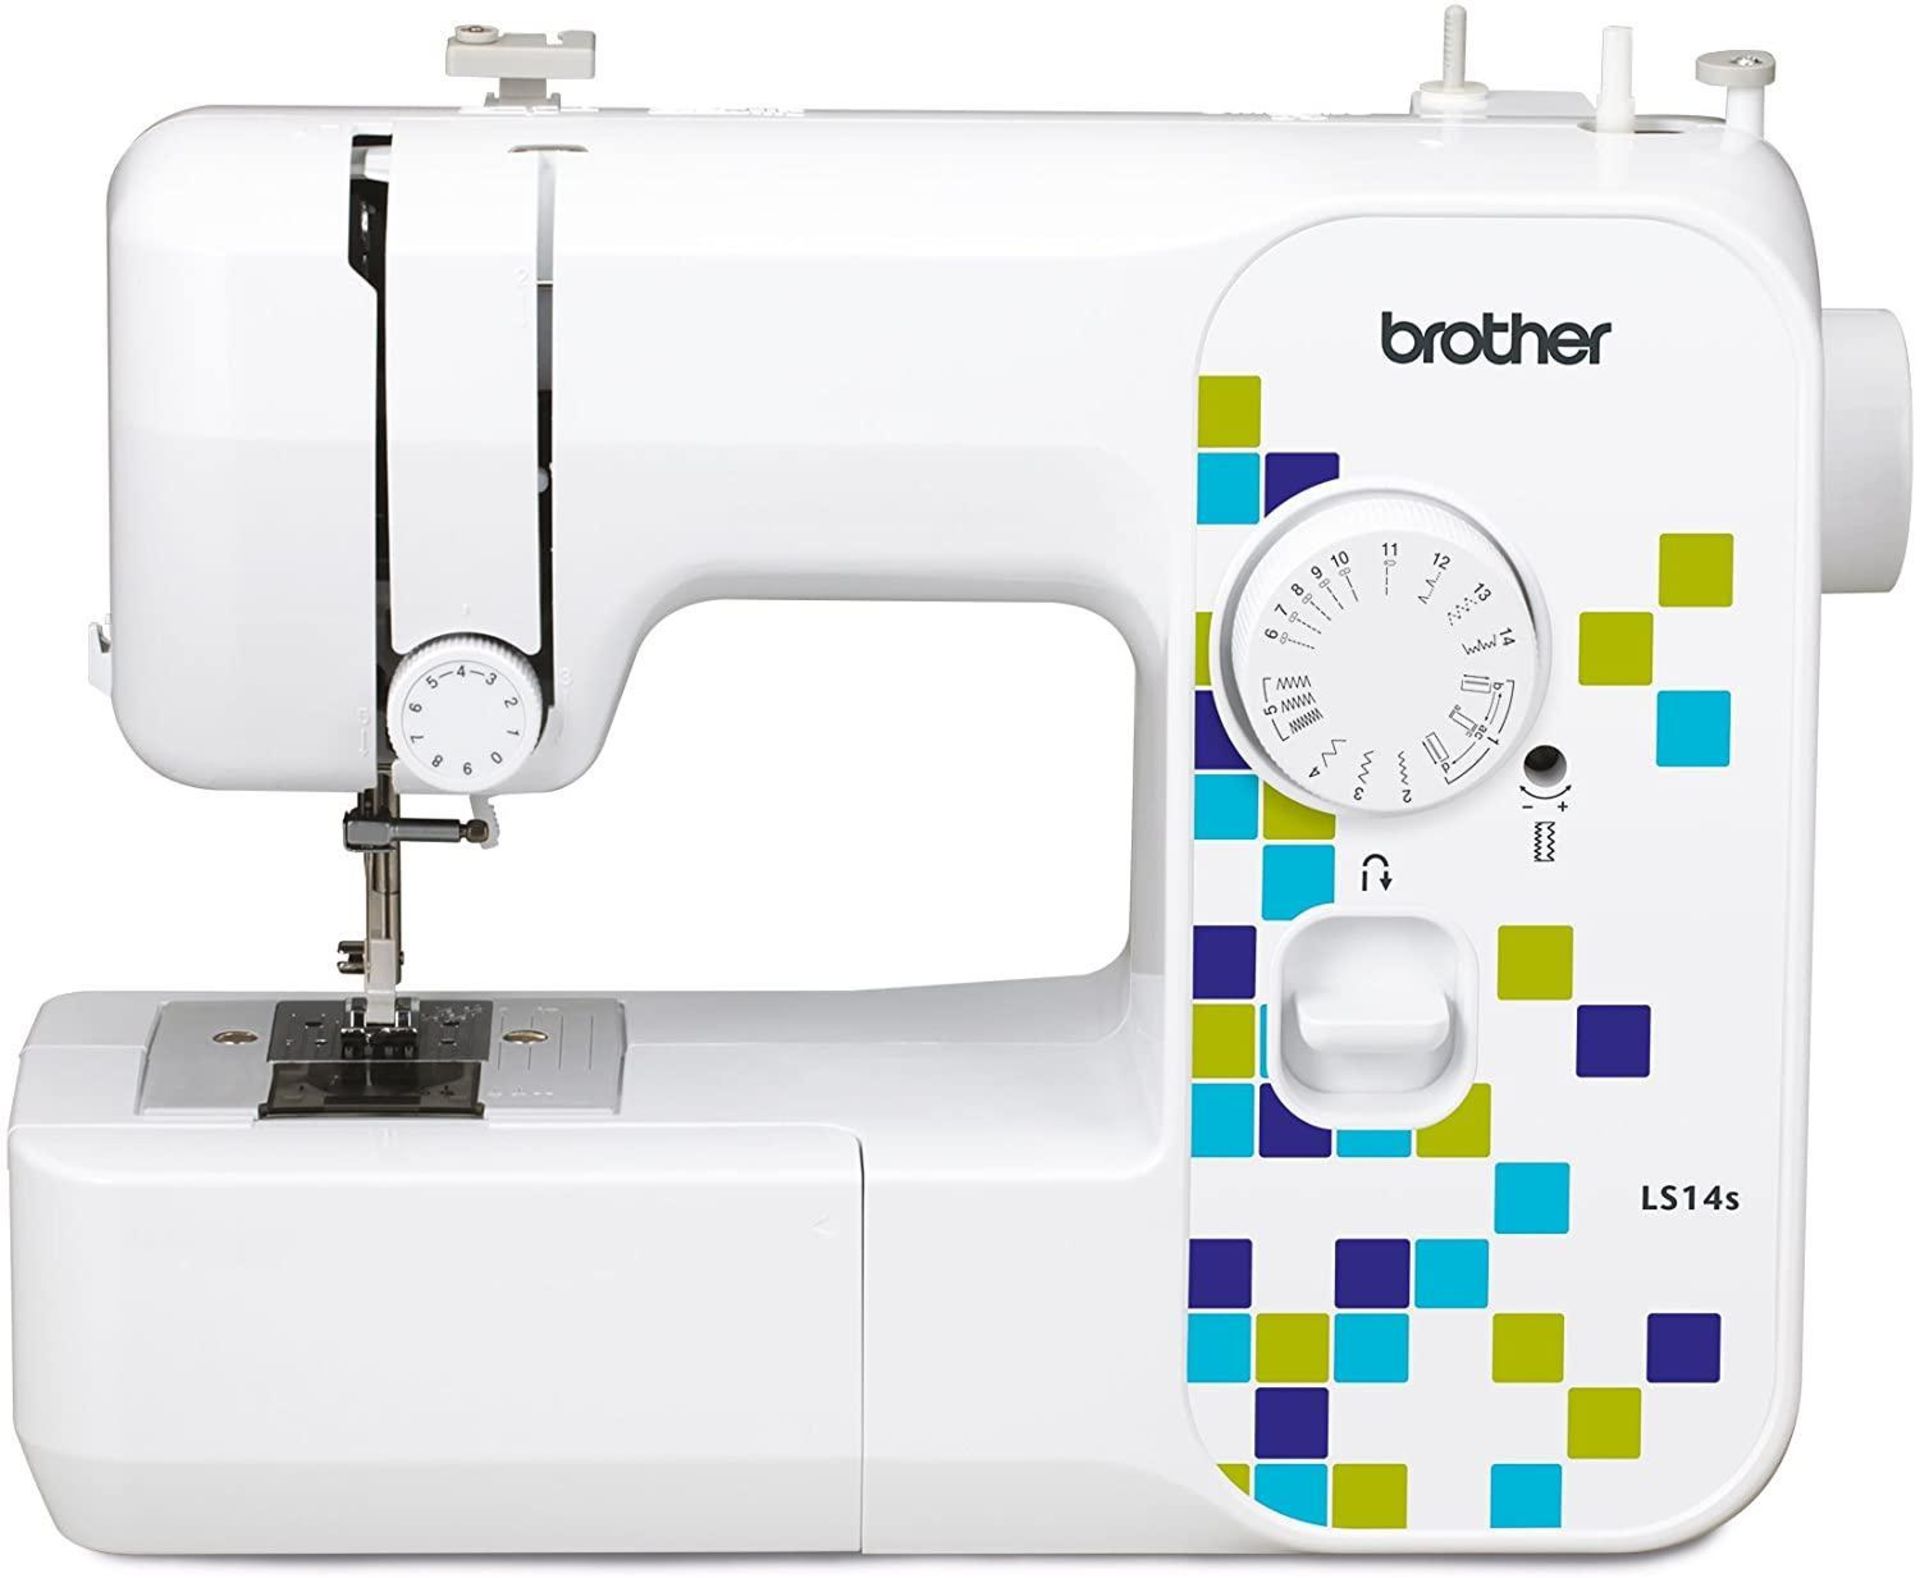 Brother LS14S Metal Chassis Sewing Machine £164.99 RRP